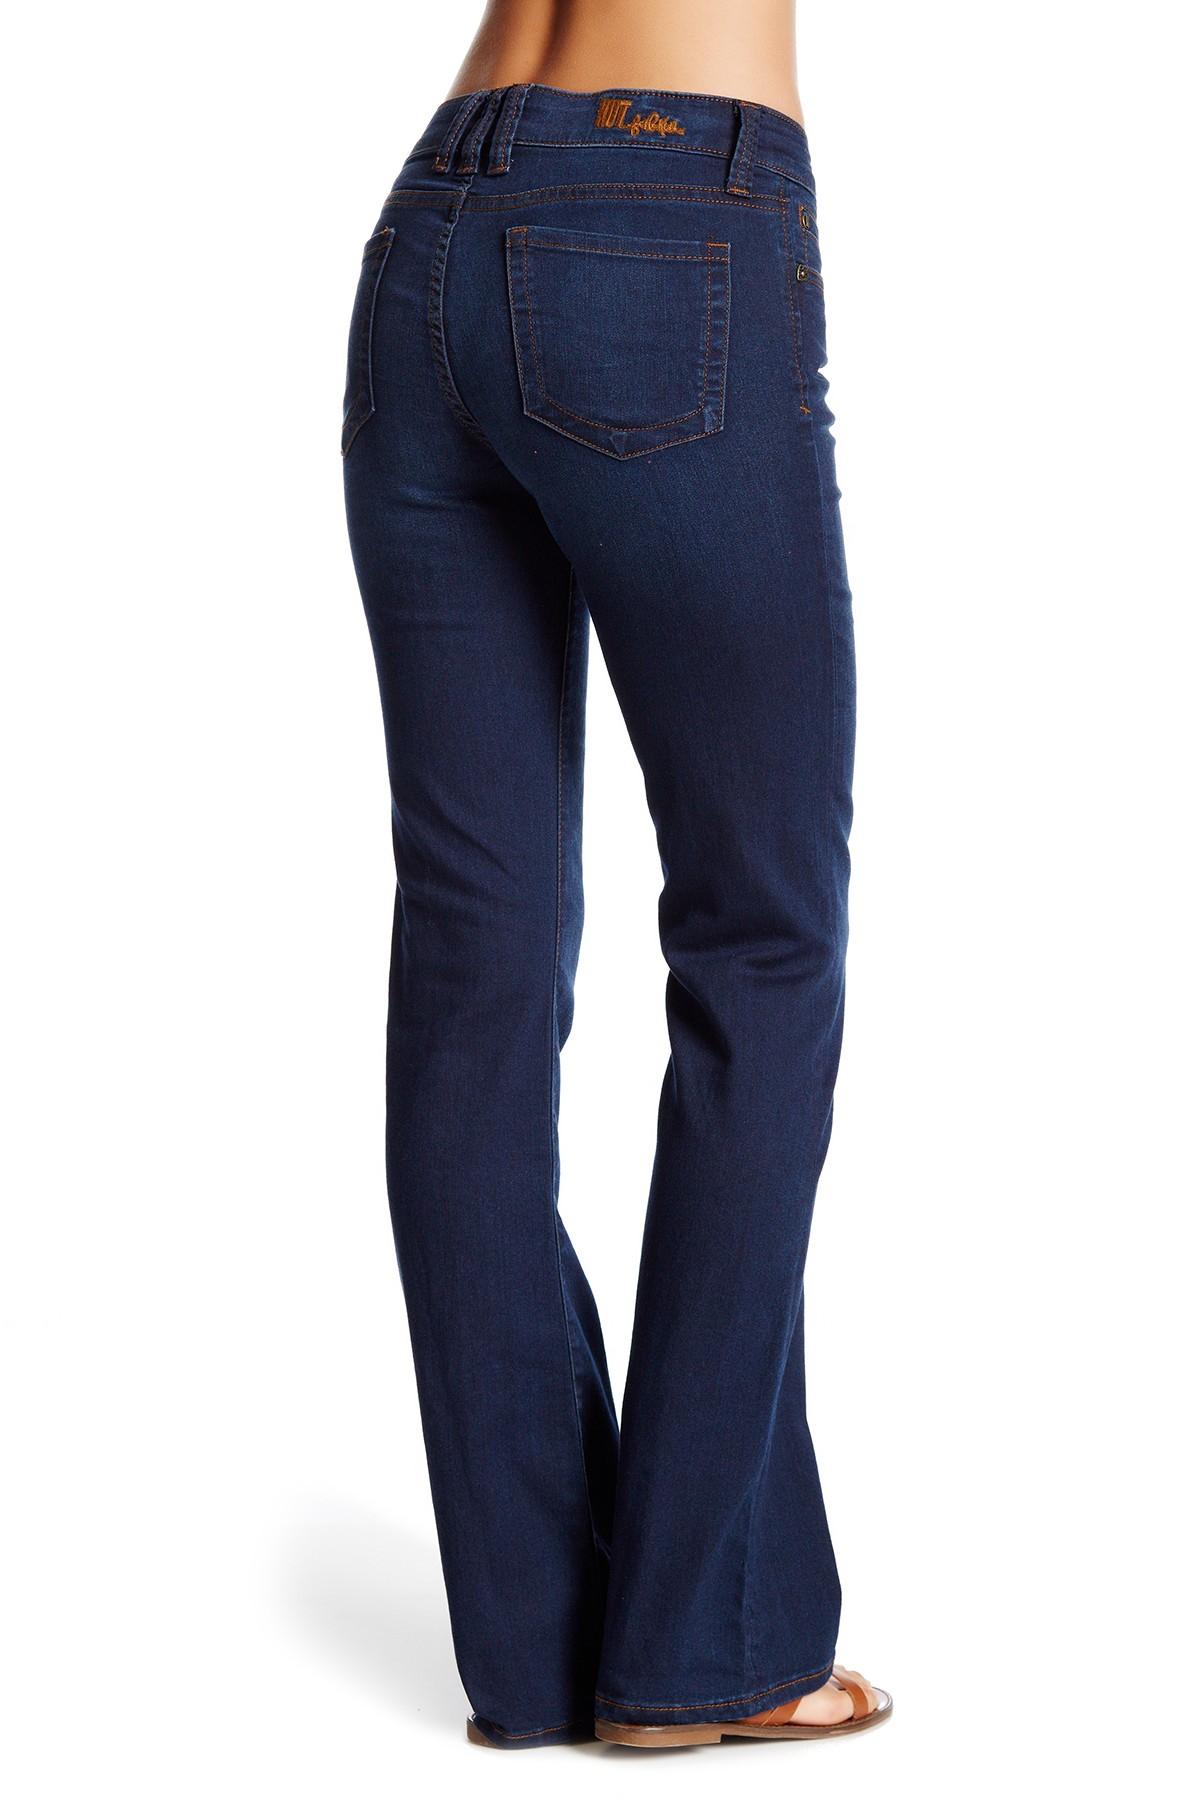 Kut From The Kloth Nicole High Rise Bootcut Jean in Blue | Lyst